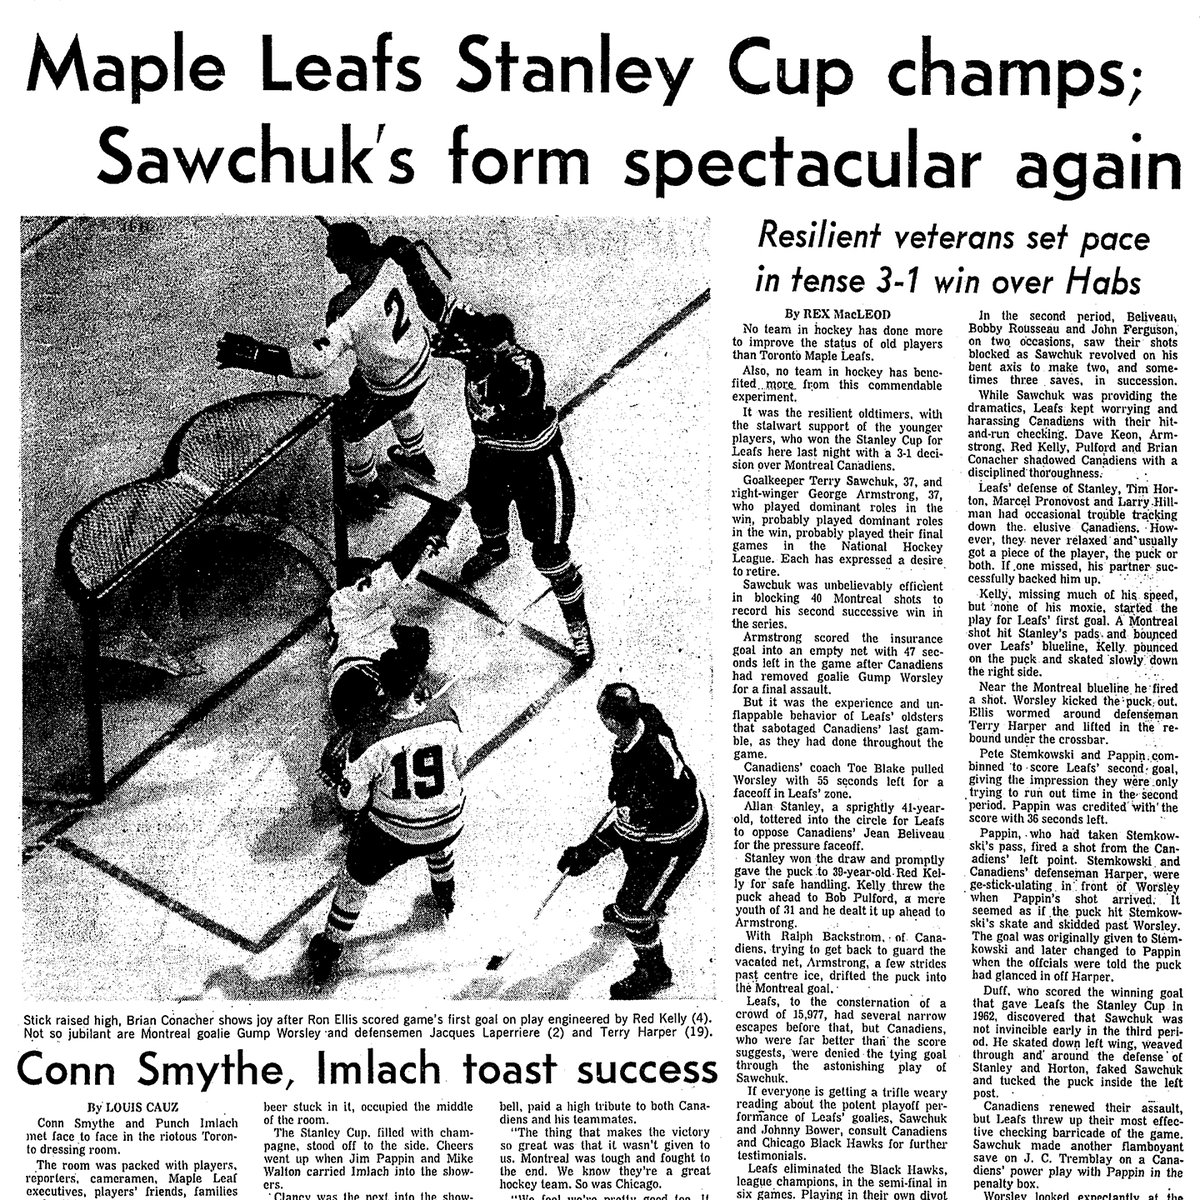 #OnThisDay 57 years ago the Toronto Maple Leafs won the Stanley Cup - May 2, 1967.

#OTD #1960s #sports #hockey #torontomapleleafs #stanleycup #history #torontohistory #tdot #the6ix #toronto #canada #hopkindesign